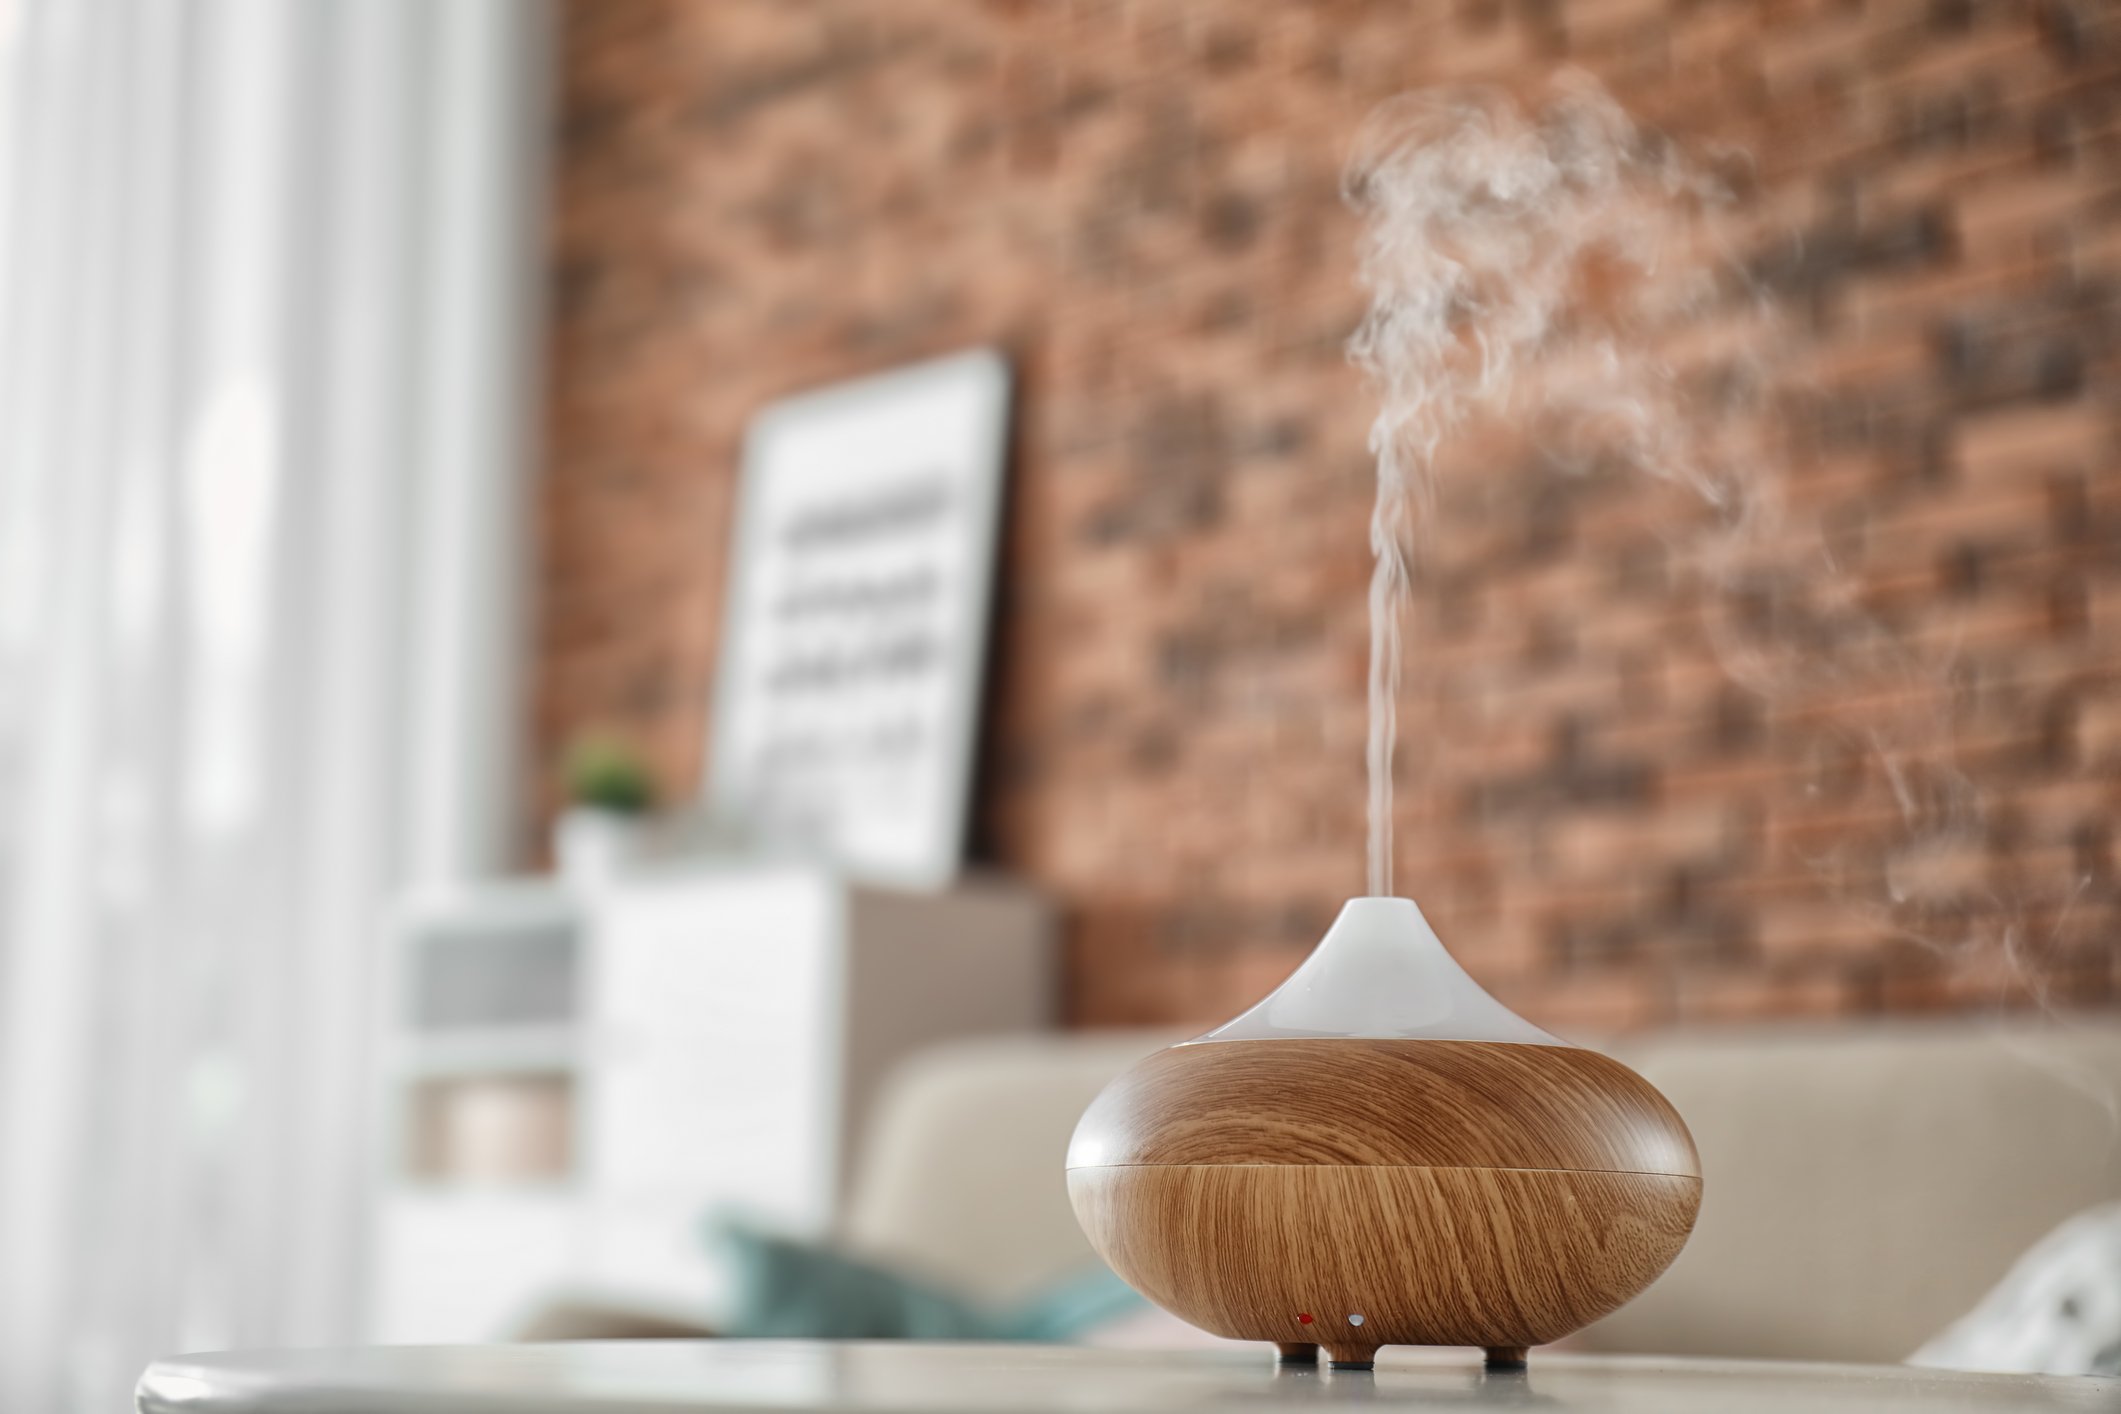 Oil Diffusers Make Your House Smell Great, but Are They Safe